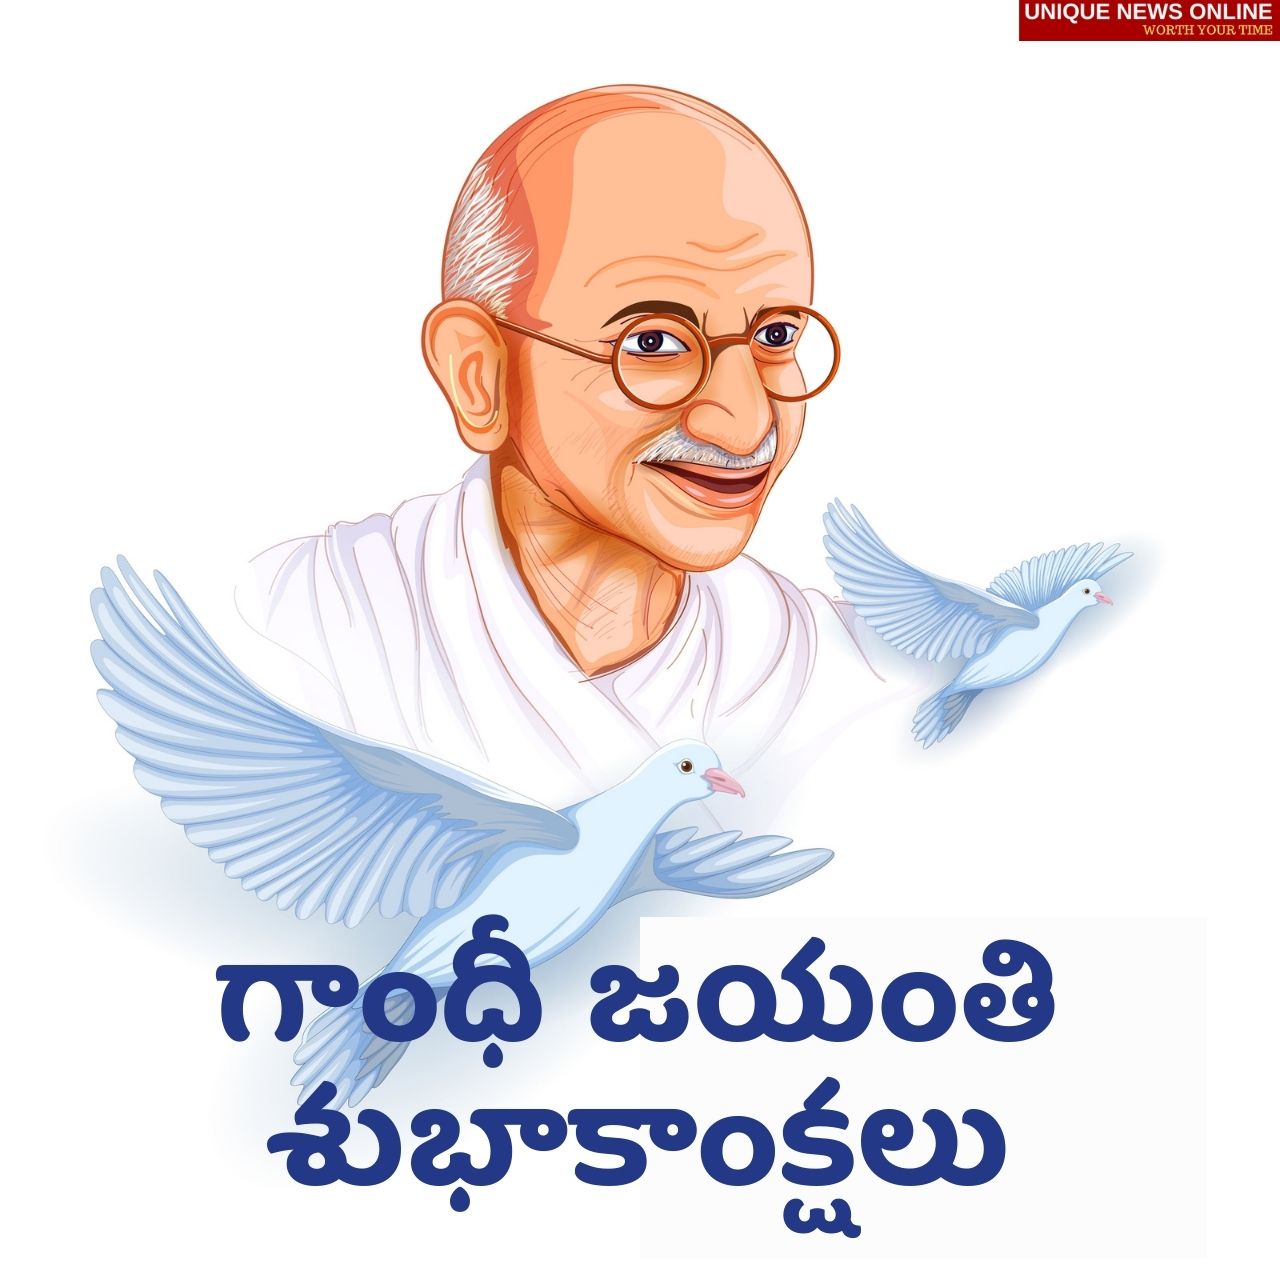 Gandhi Jayanti 2021 Telugu Wishes, Quotes, Messages, Wishes, Greetings, and HD Images to share